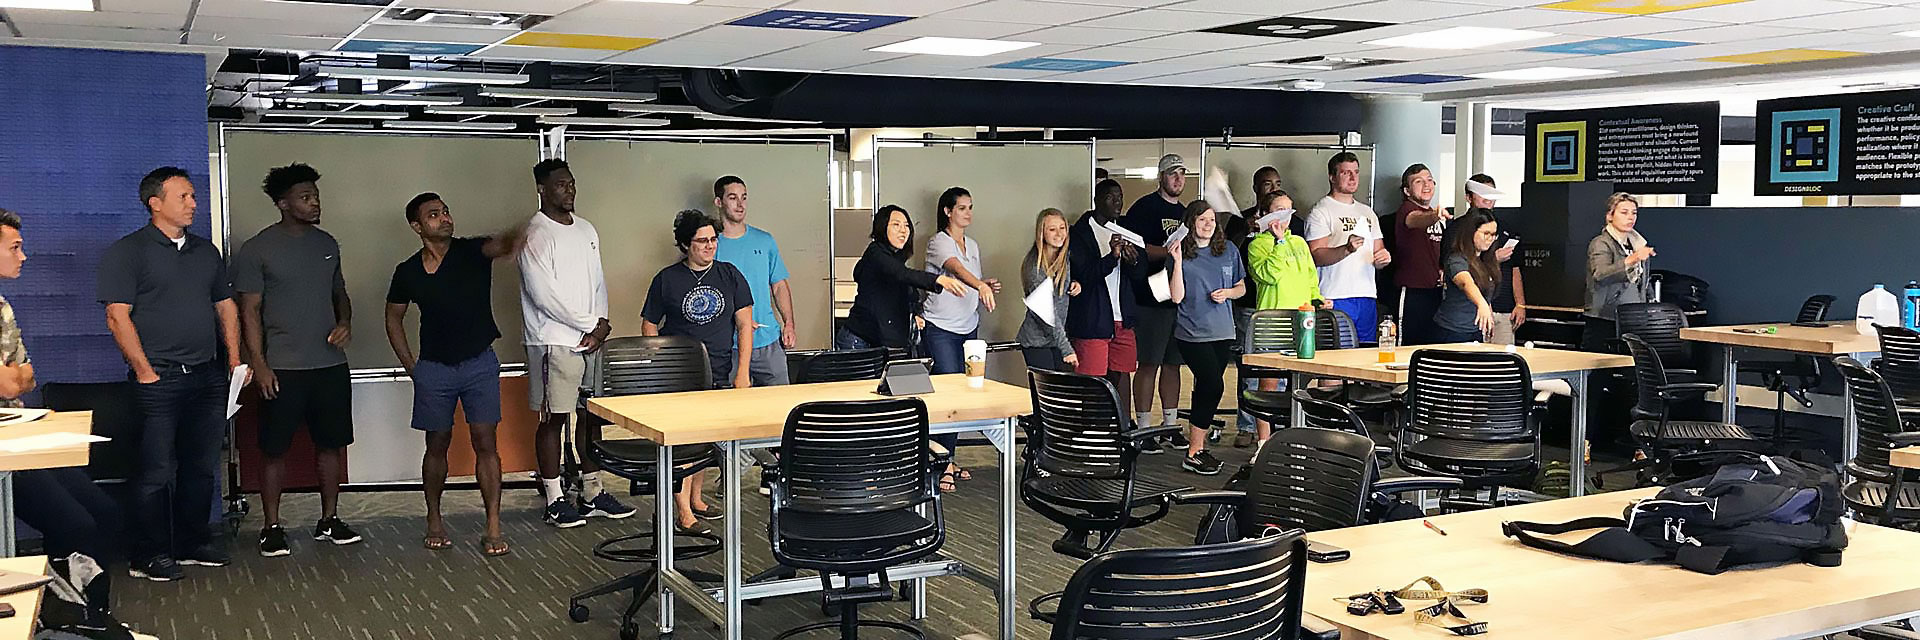 Participants in a Rapid Iteration workshop sail their paper airplanes across the classroom during one iteration of testing.